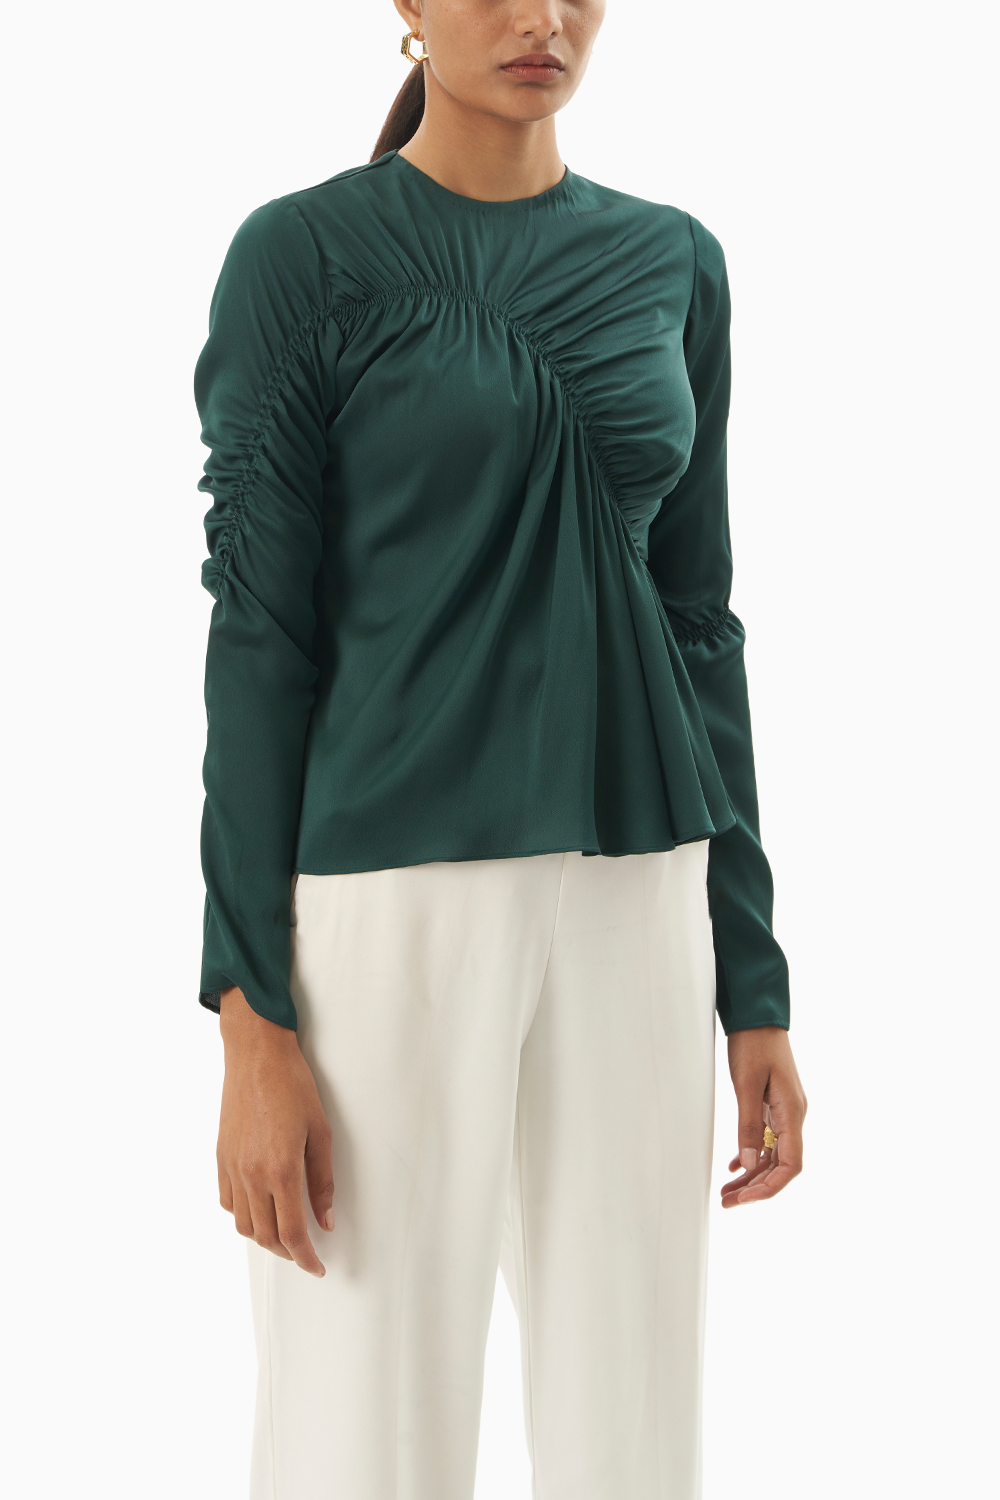 Forest Green Full Sleeve Ruched Top